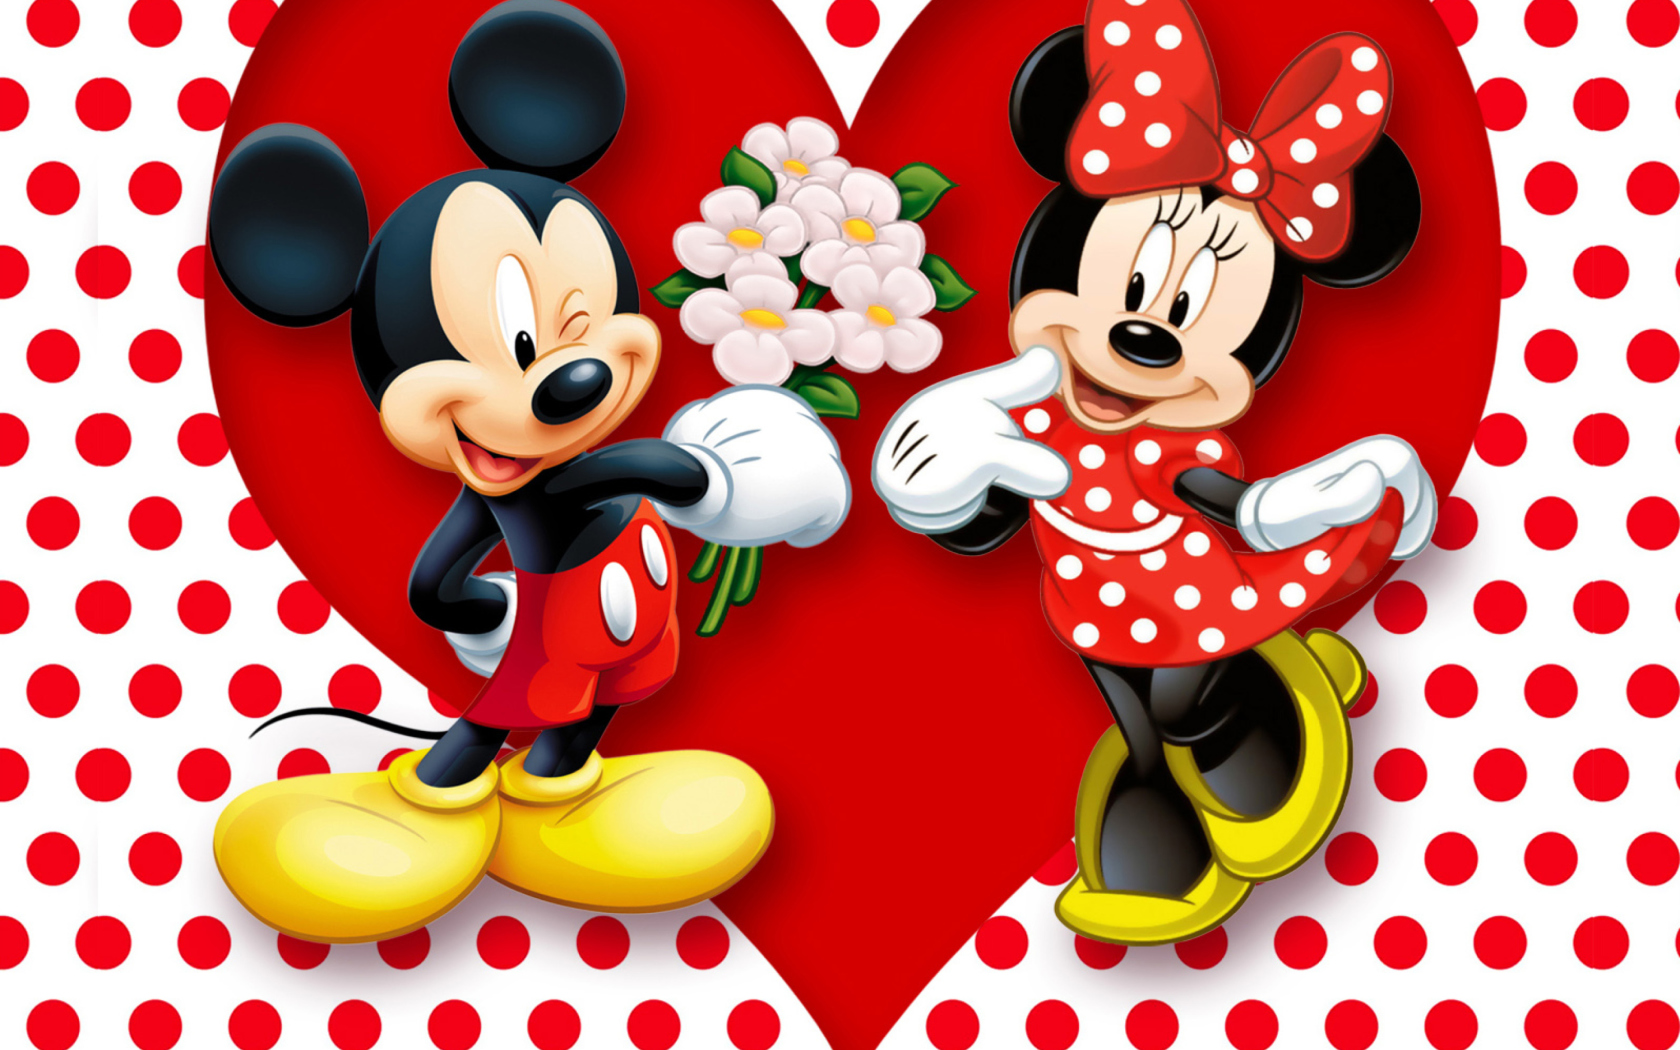 Das Mickey And Minnie Mouse Wallpaper 1680x1050